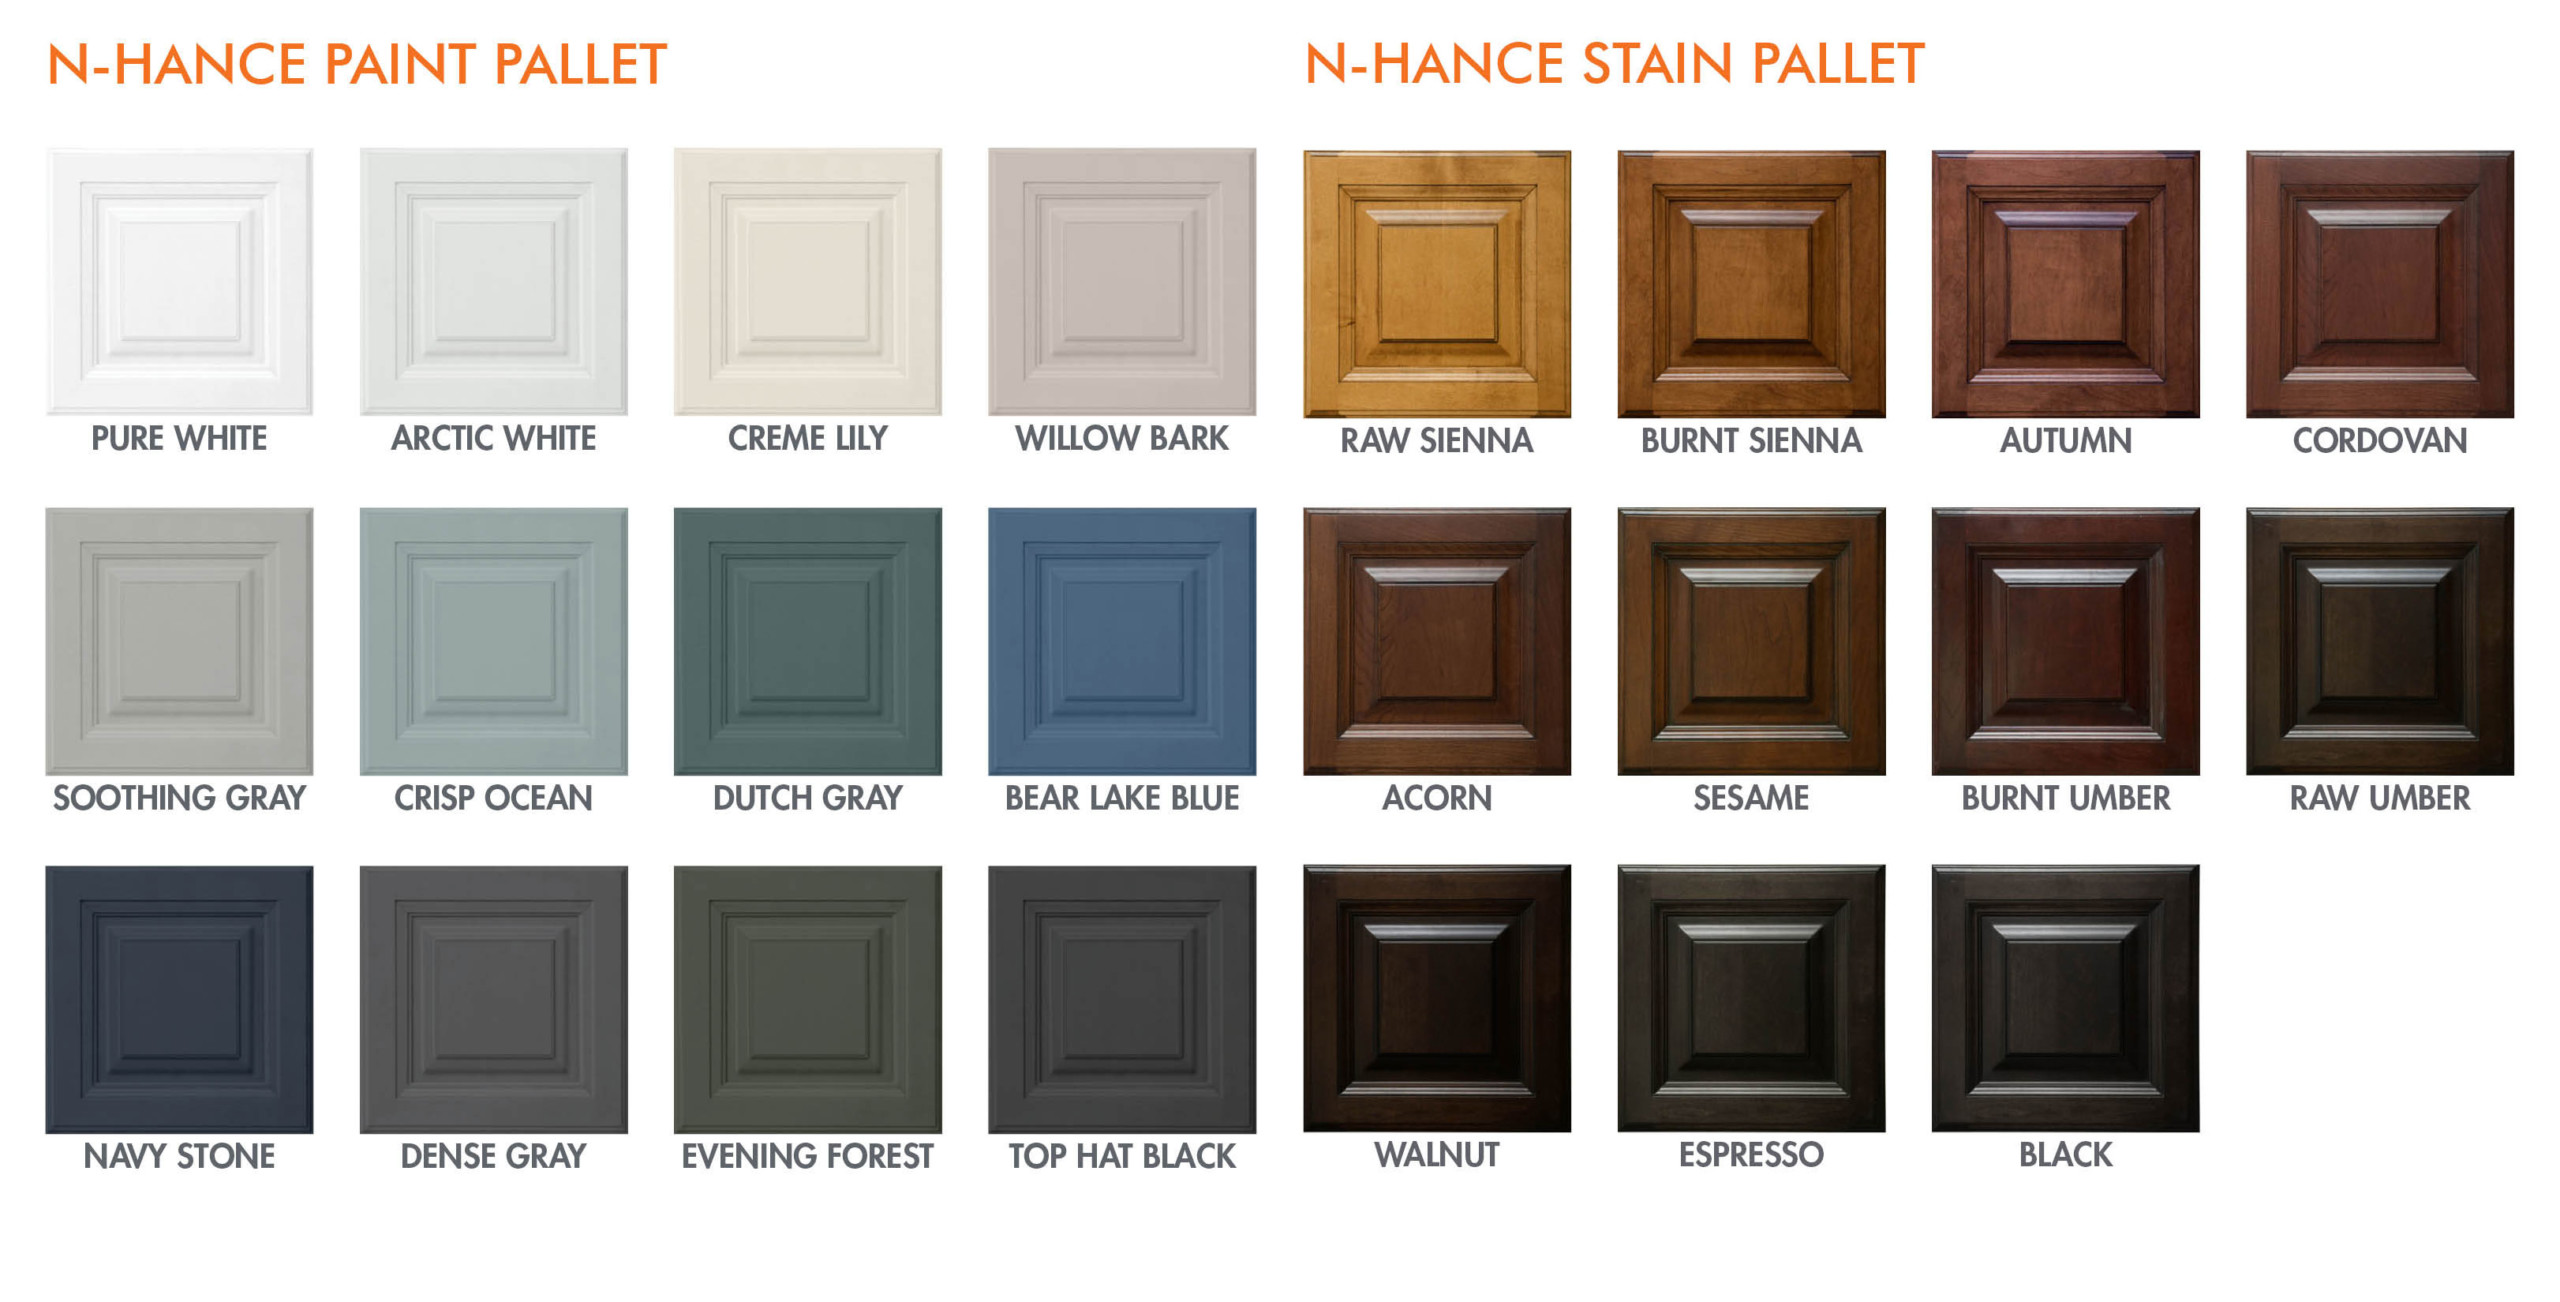 Cabinet Refacing and Refinishing Options